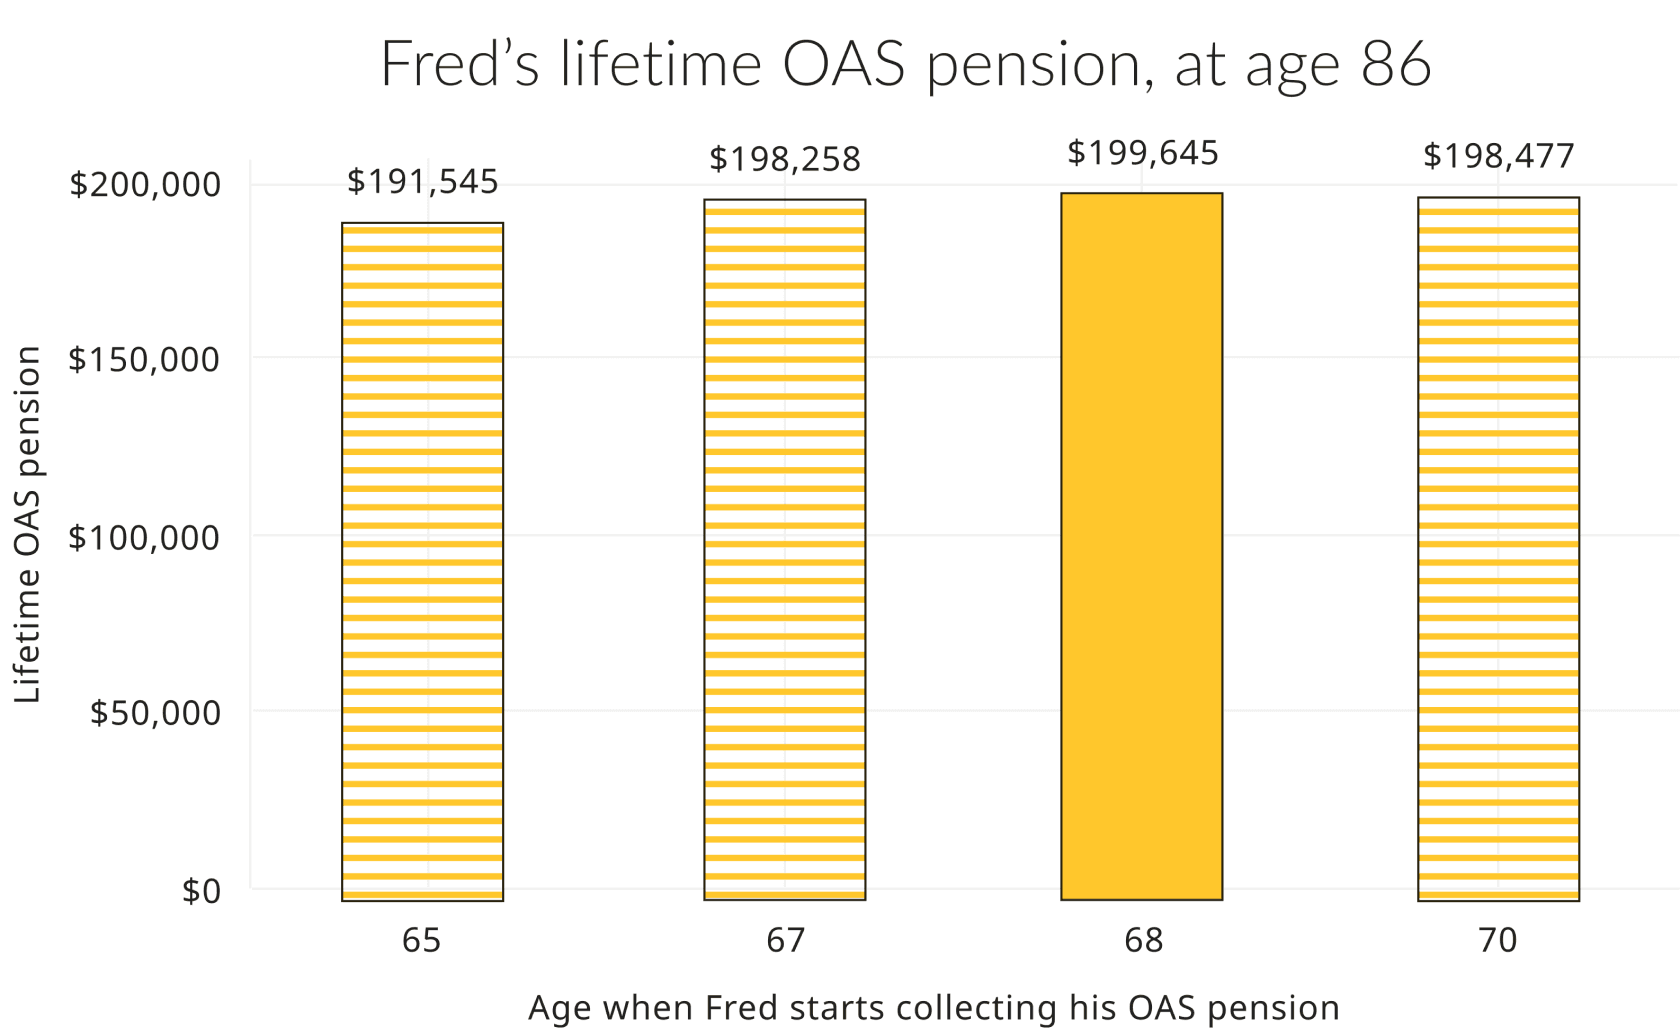 The chart shows changes in Fred's lifetime OAS pension payments depending on what age he starts. By age 86, the lifetime OAS pension is higher, if Fred starts his OAS at age 68.